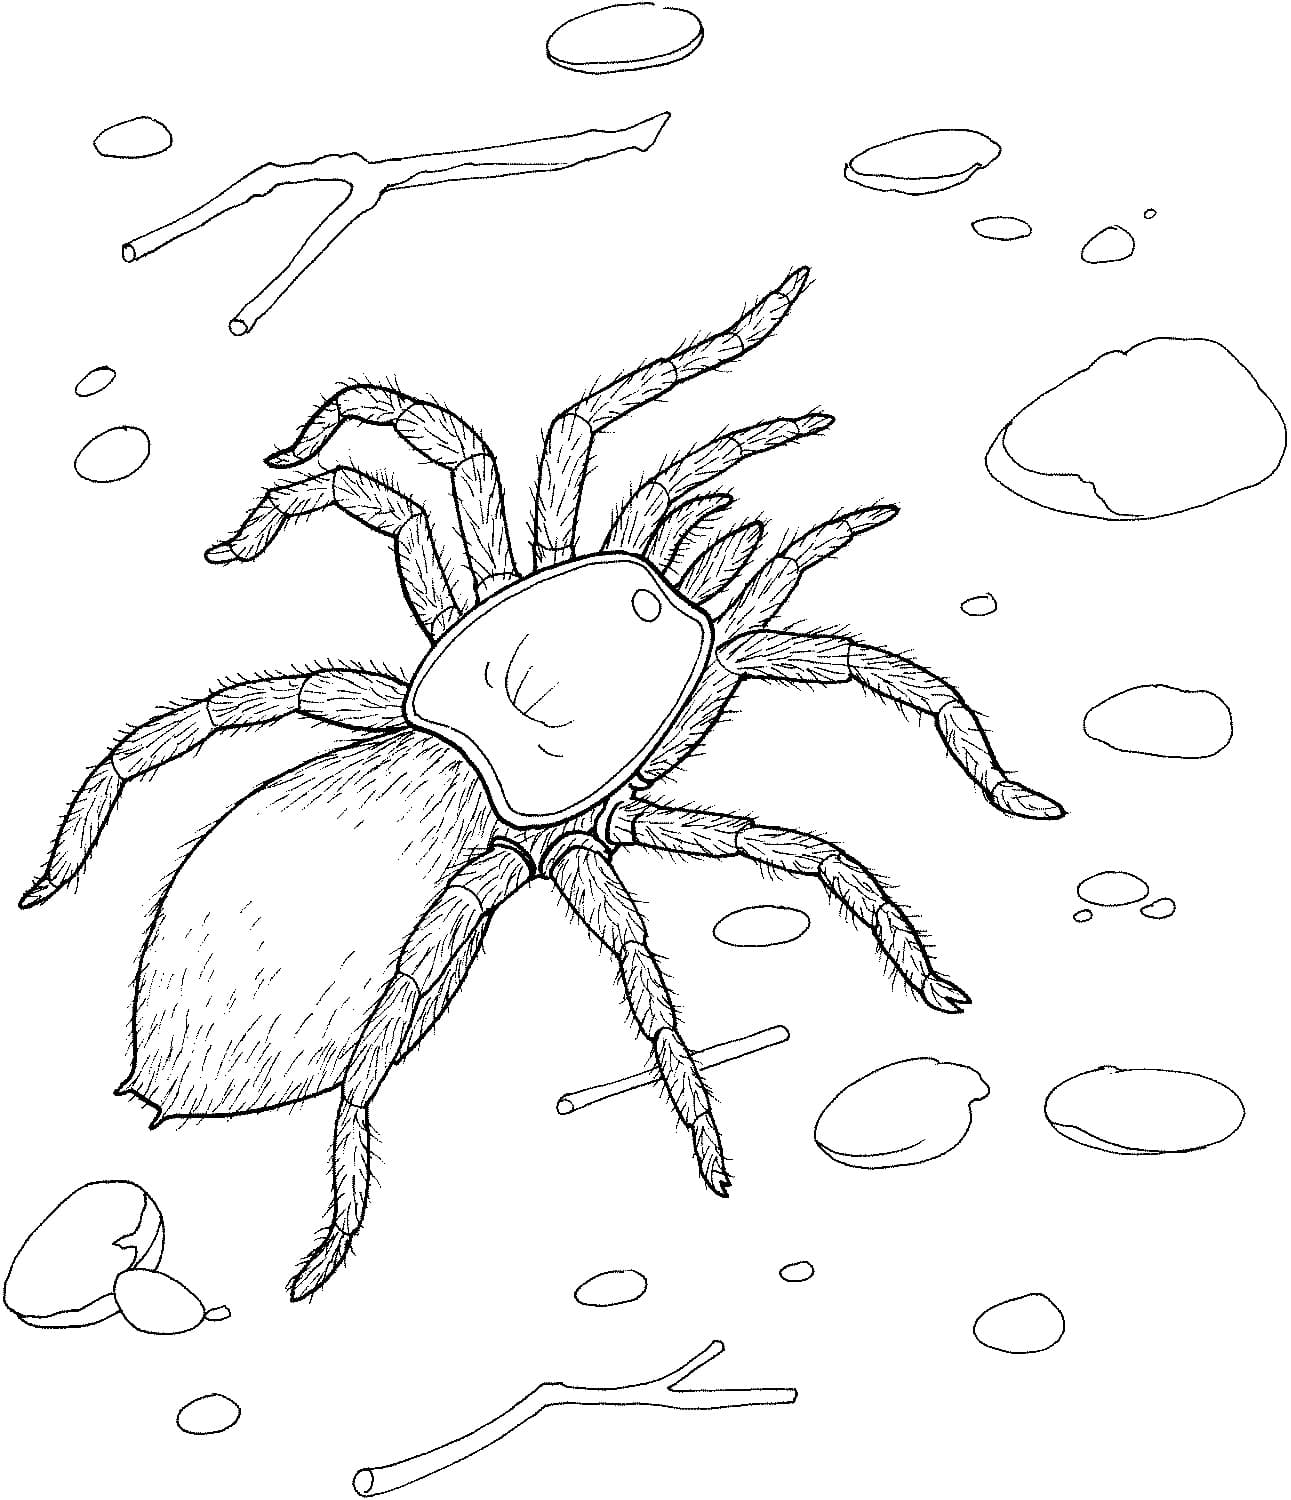 Spider coloring pages for kids